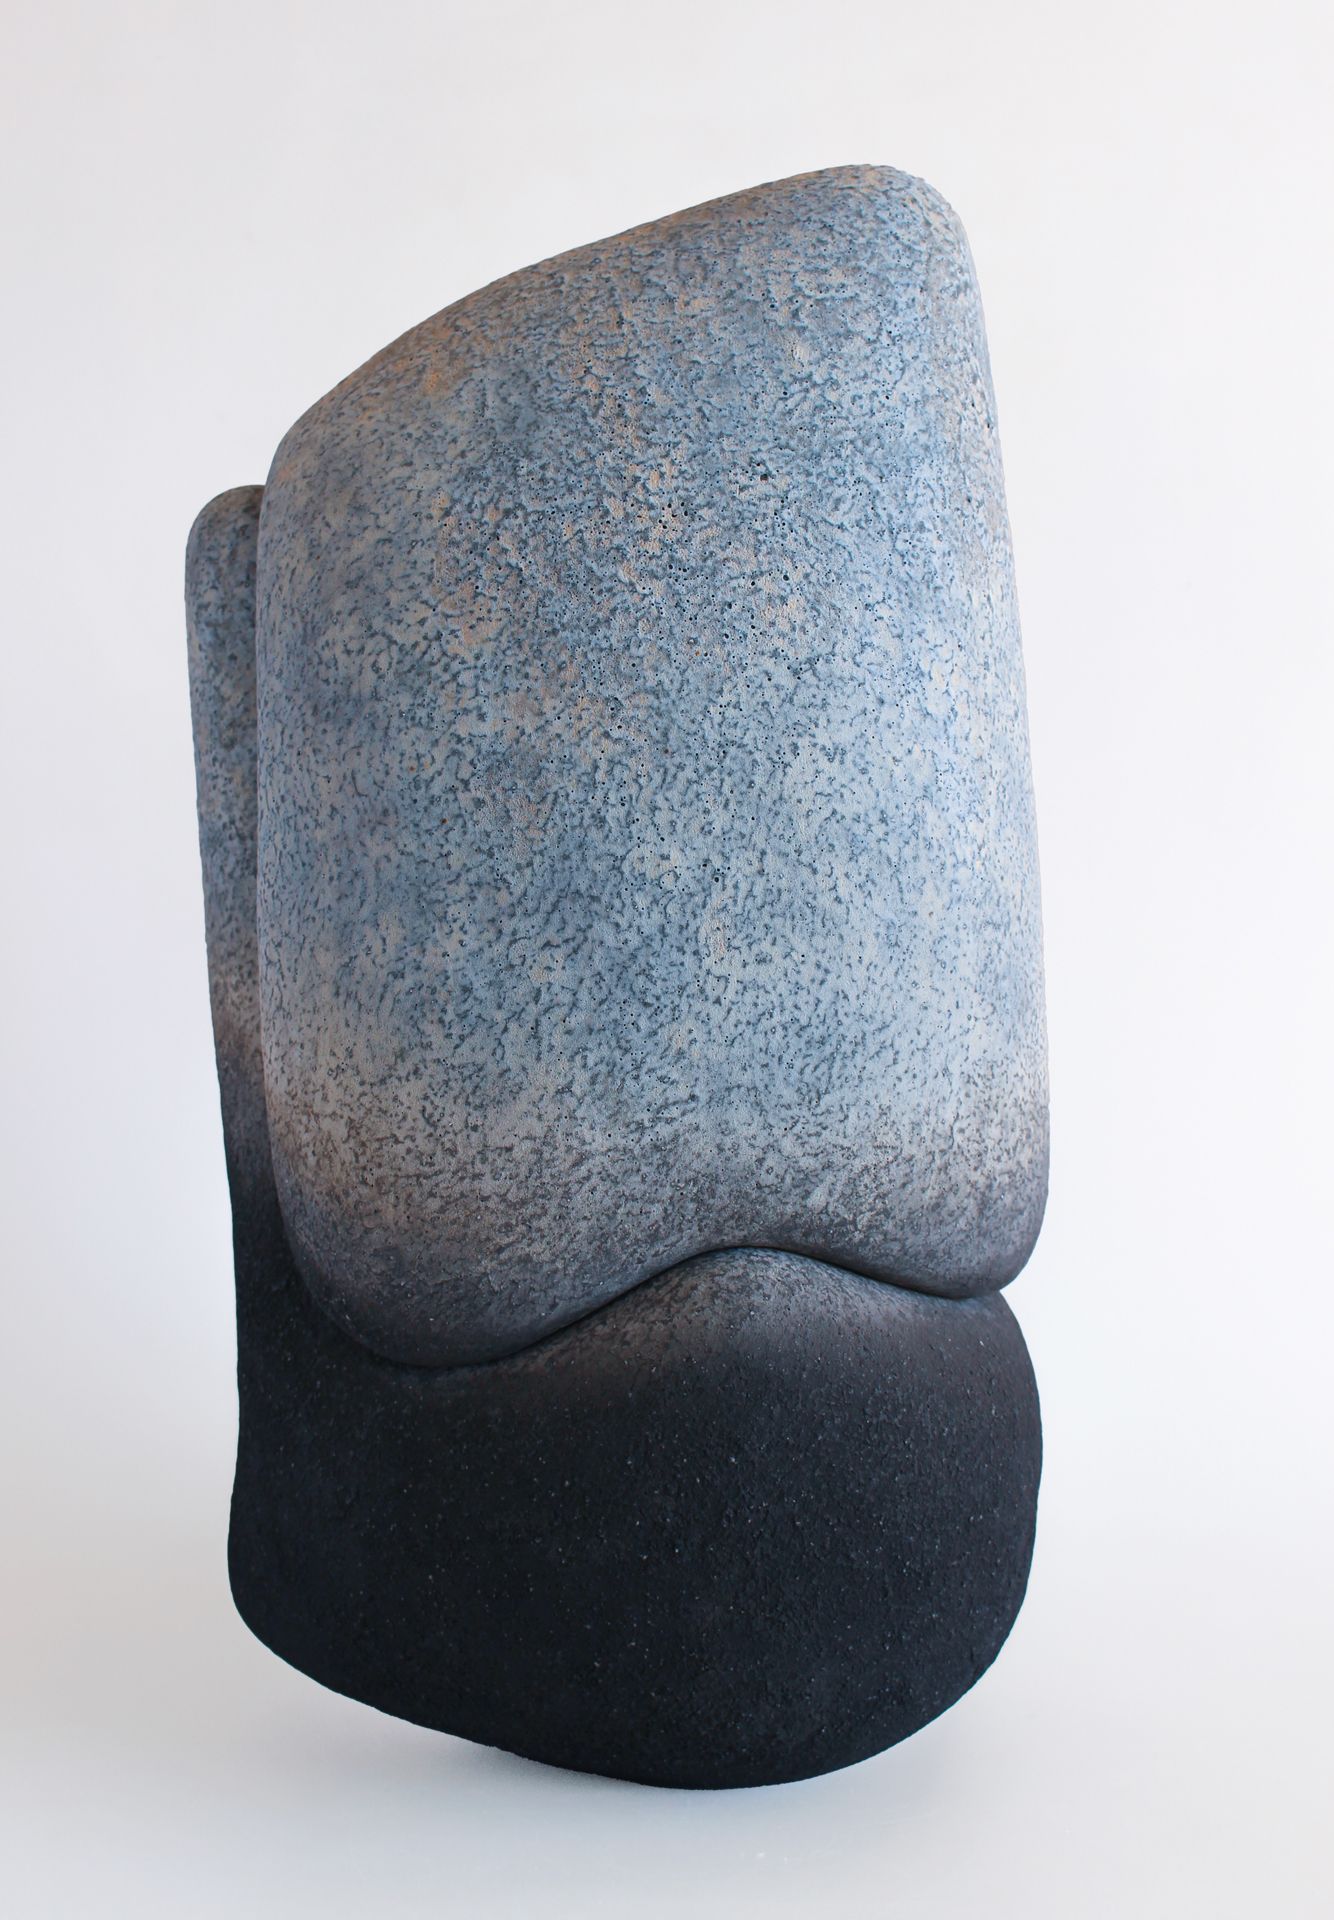 Abstract sculpture in ceramic by Japanese artist Kenji Gomi.